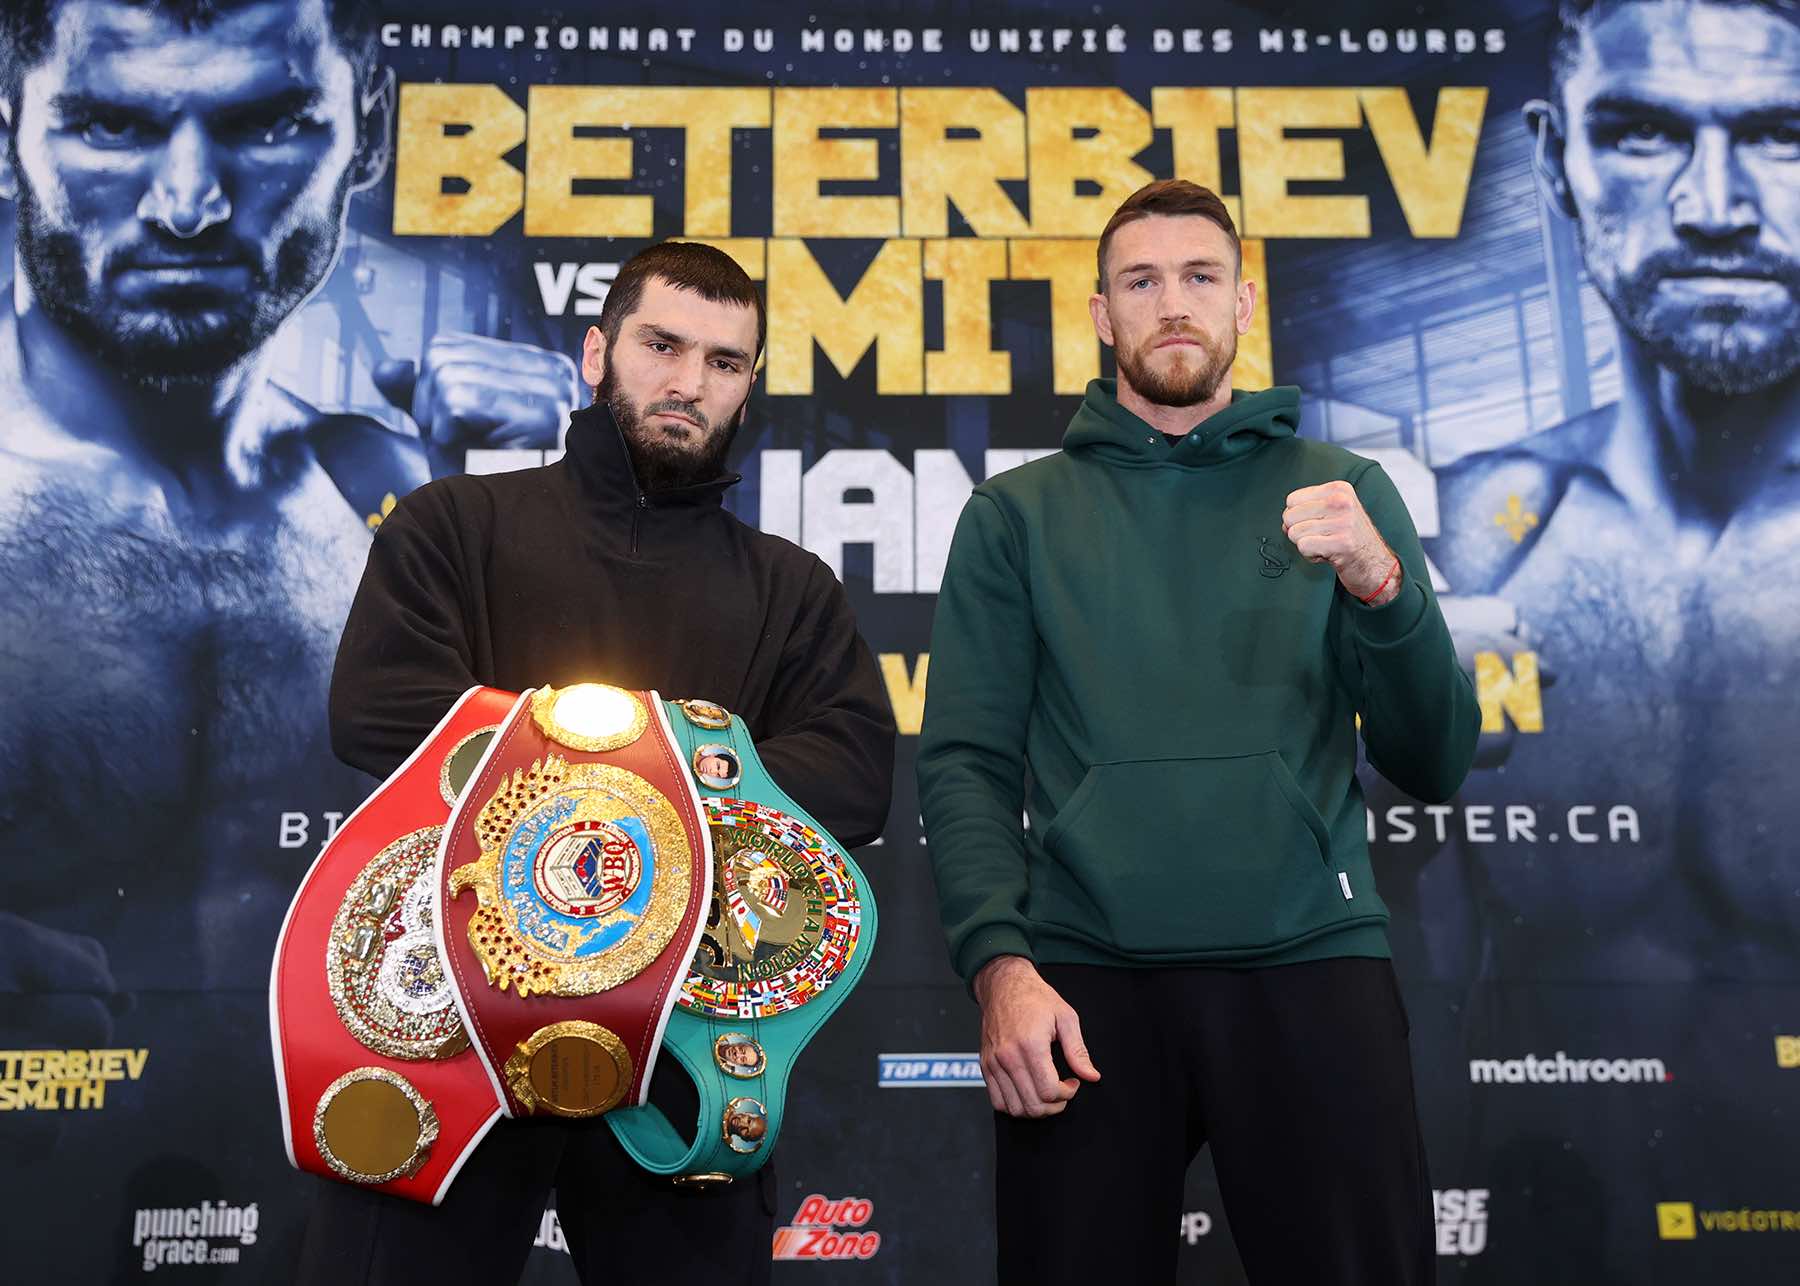 Hearn warns Beterbiev that 'he will be knocked out cold' if Smith lands 'clean'